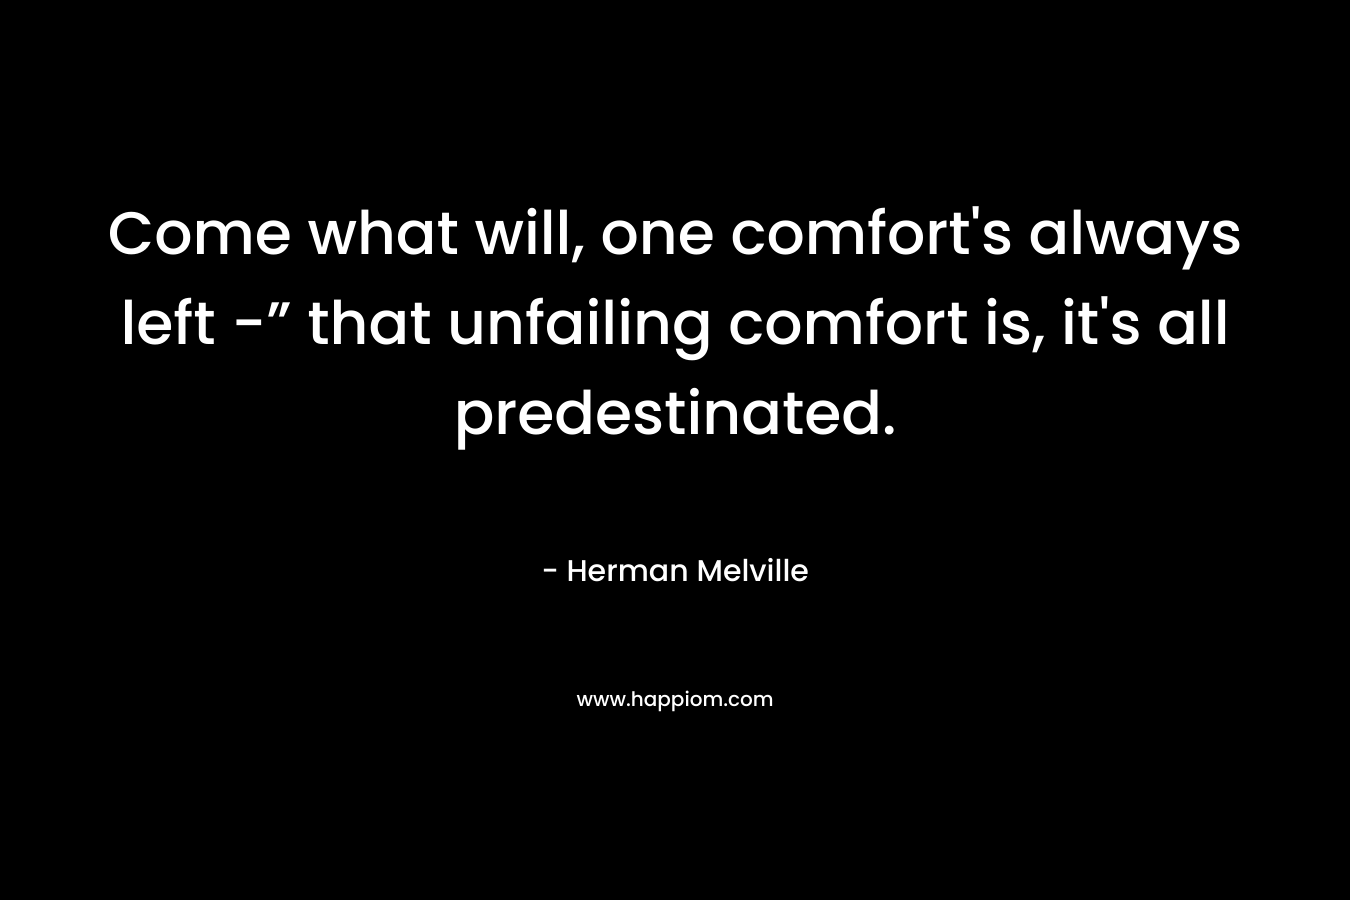 Come what will, one comfort's always left -” that unfailing comfort is, it's all predestinated.